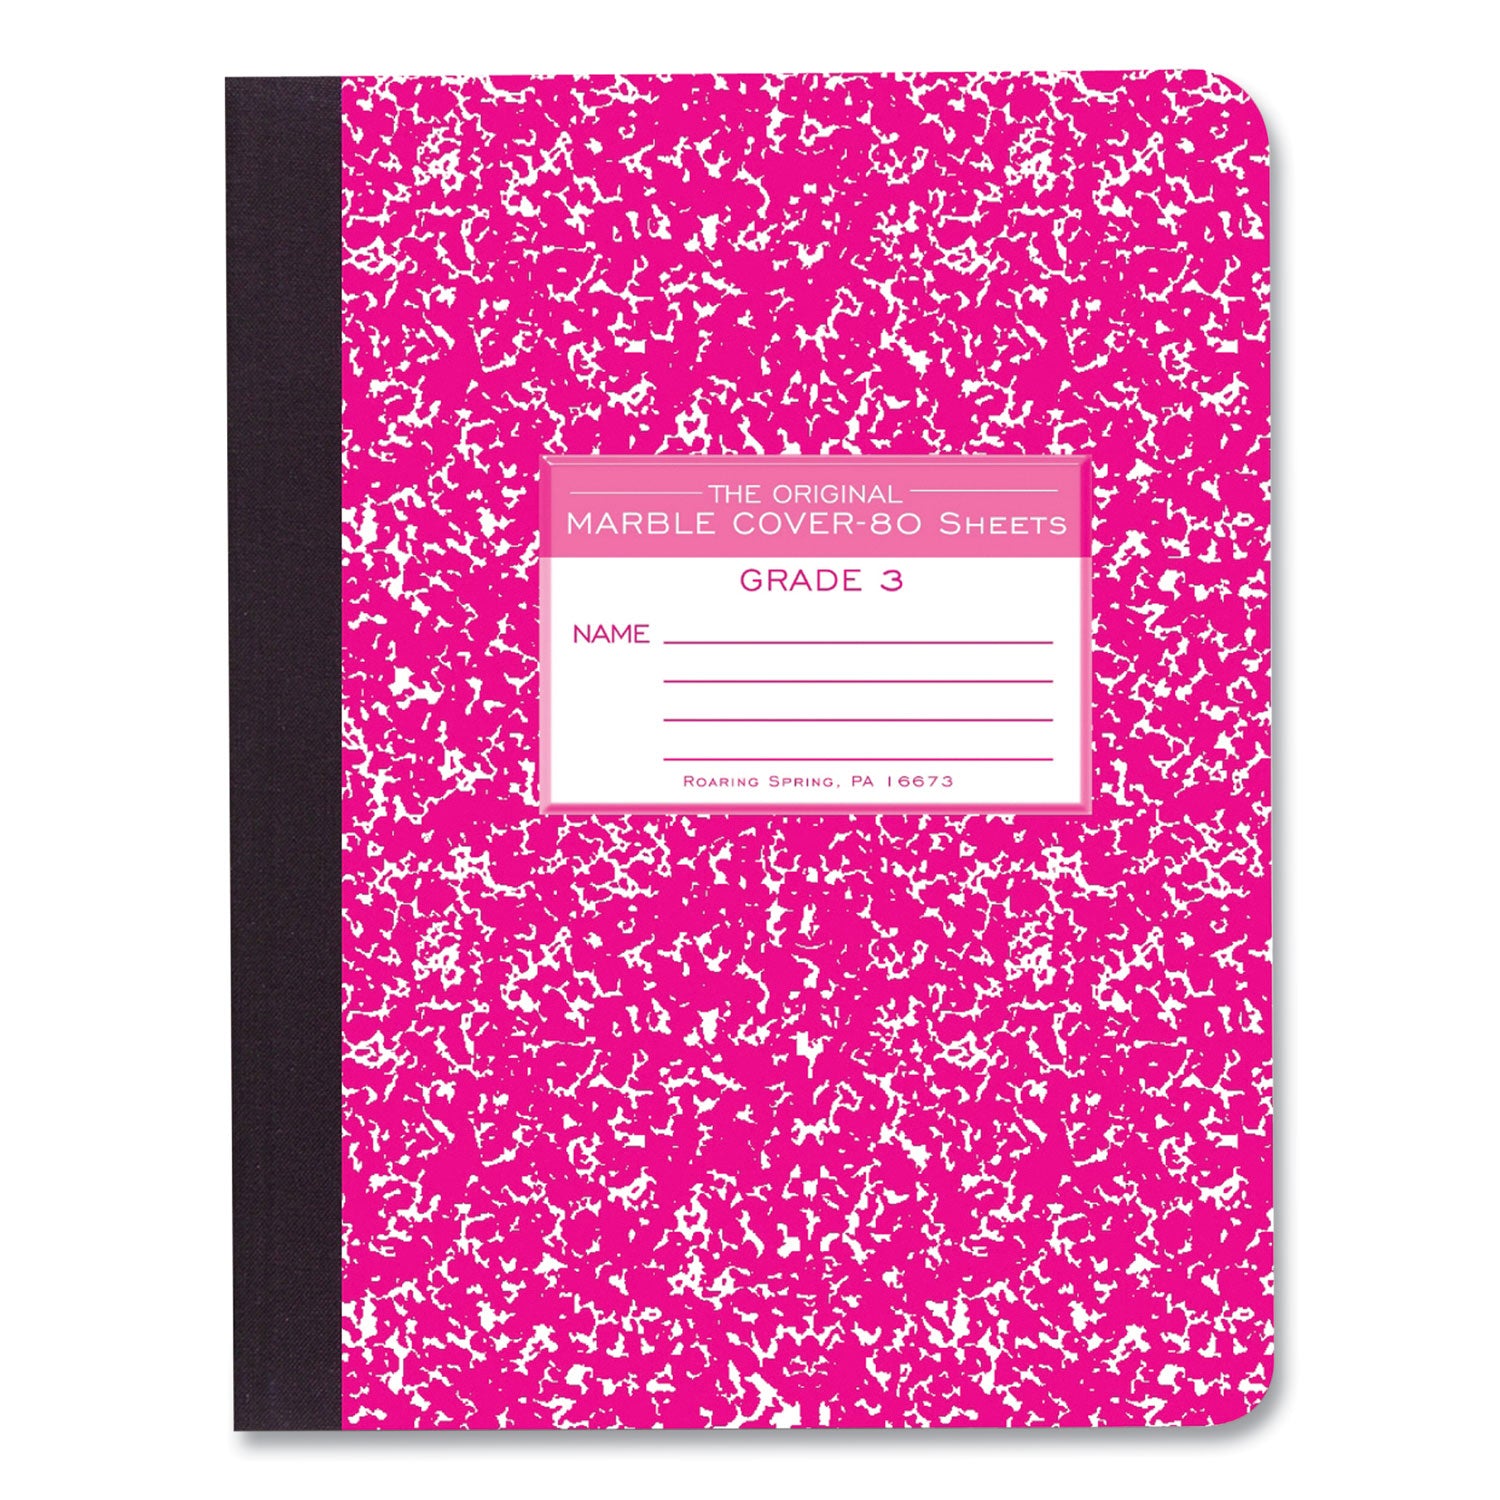 ruled-composition-book-grade-3-manuscript-format-magenta-marble-cover-80-975-x-75-sheet-48-ct-ships-in-4-6-bus-days_roa97227cs - 2